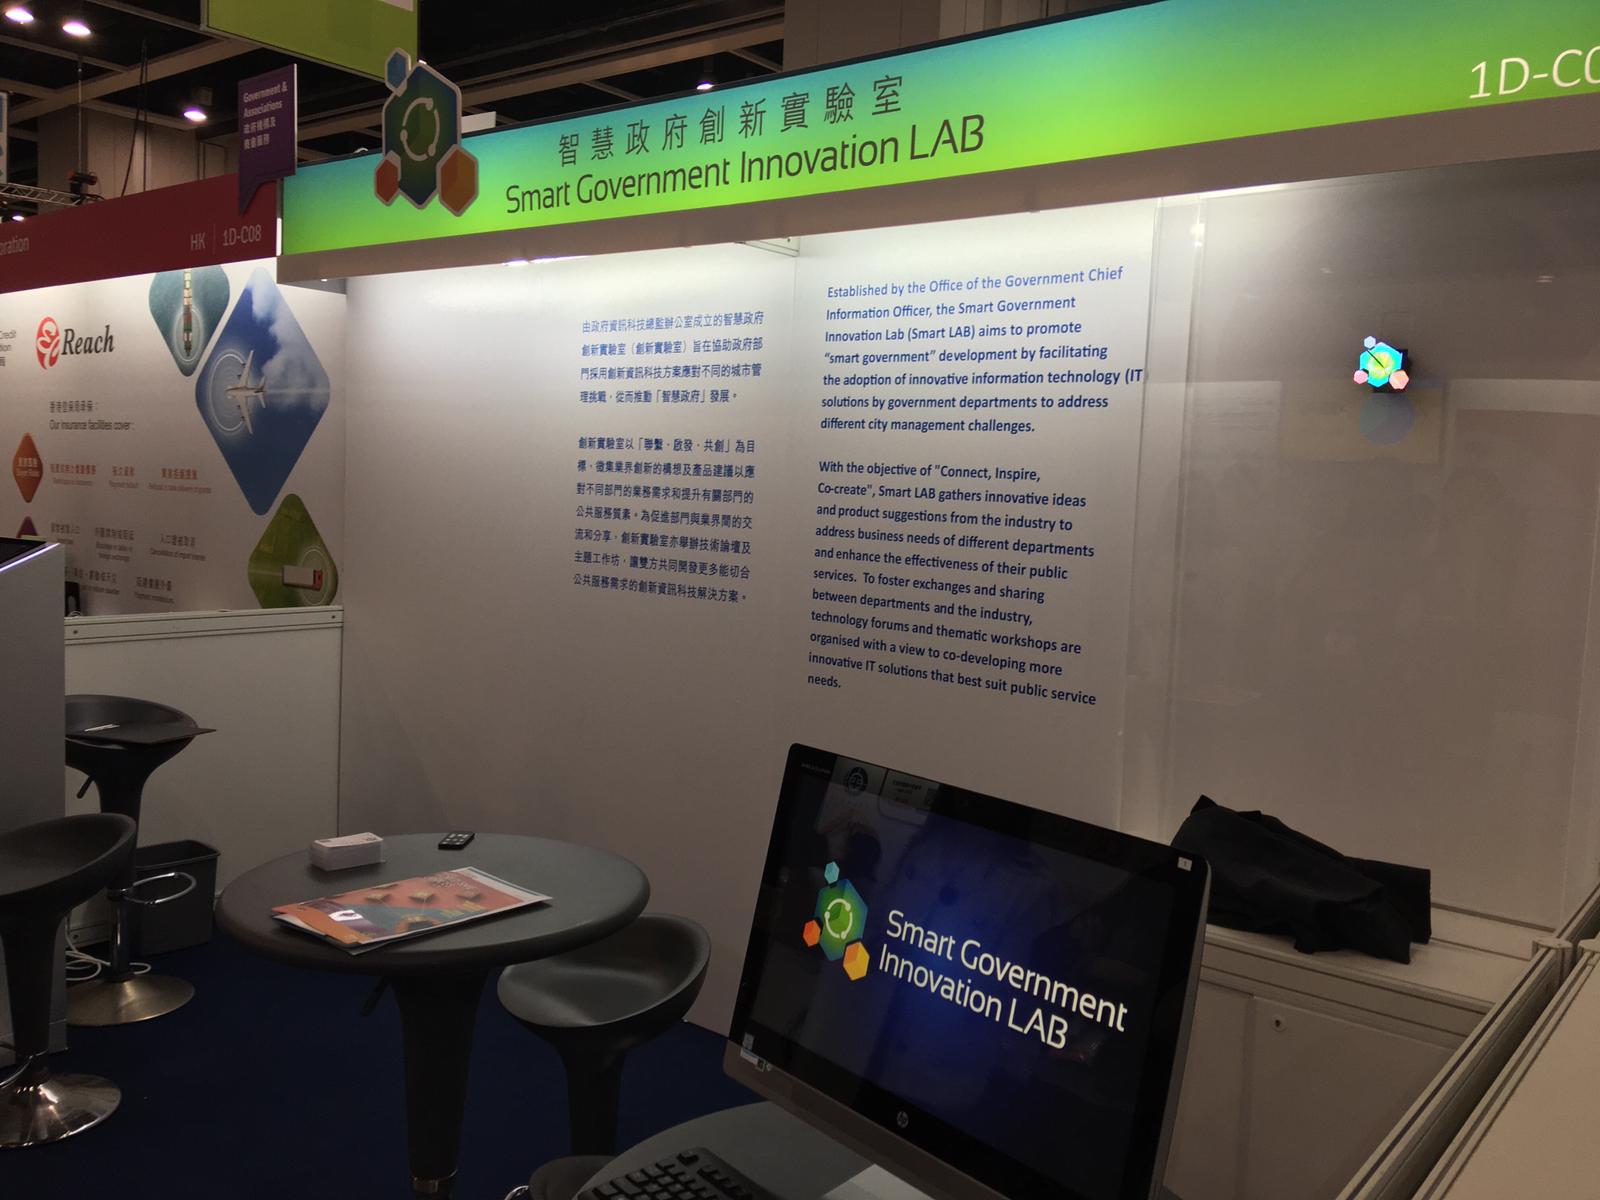 Smart Government Innovation Lab at the SmartBiz Expo 2019